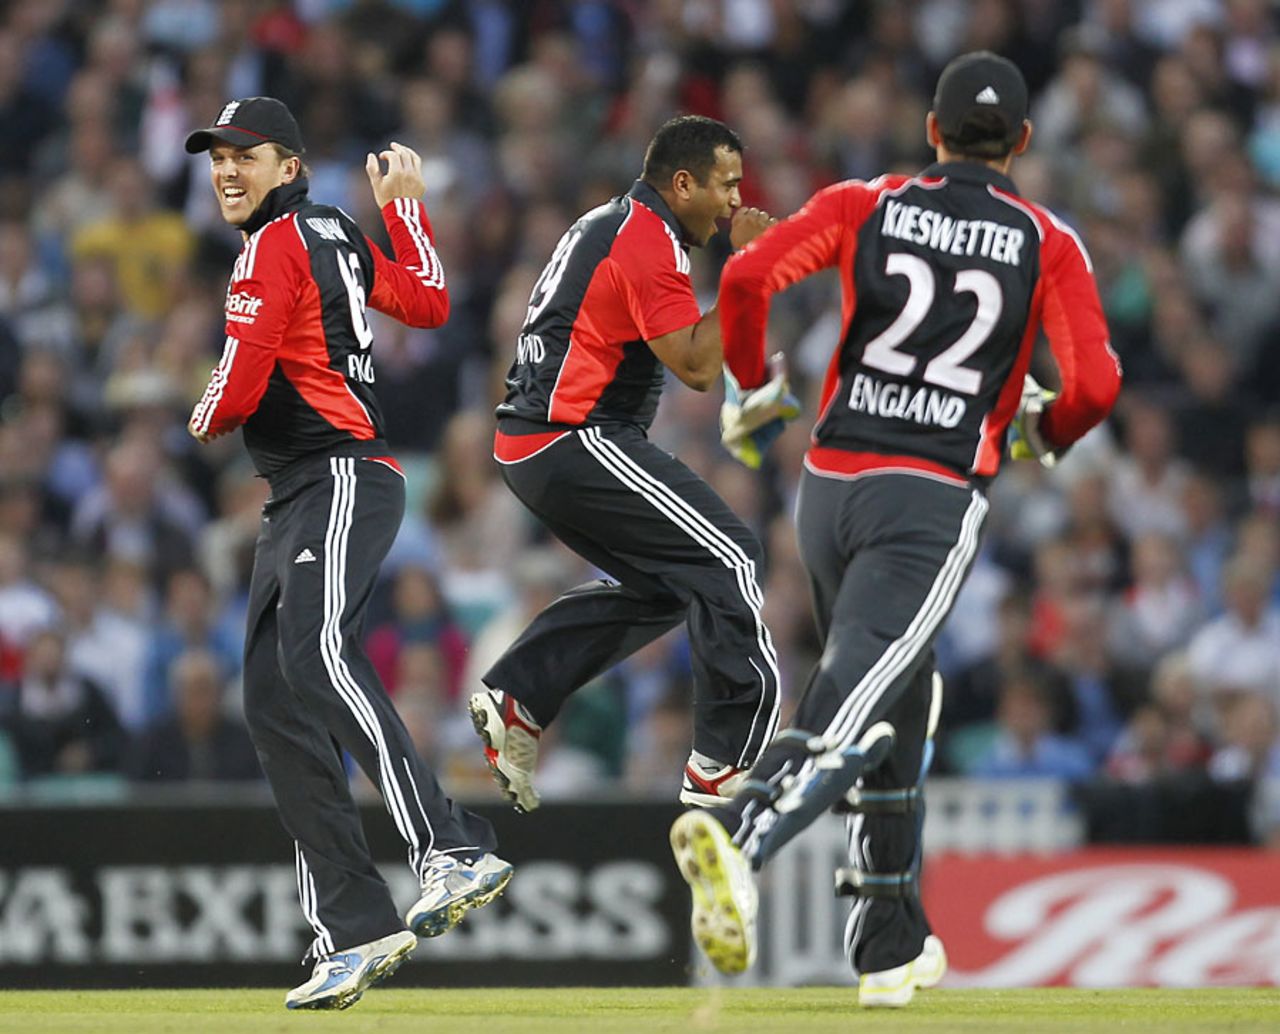 Samit Patel made the breakthrough after a rapid start from West Indies, England v West Indies, 1st Twenty20, The Oval, September 23, 2011